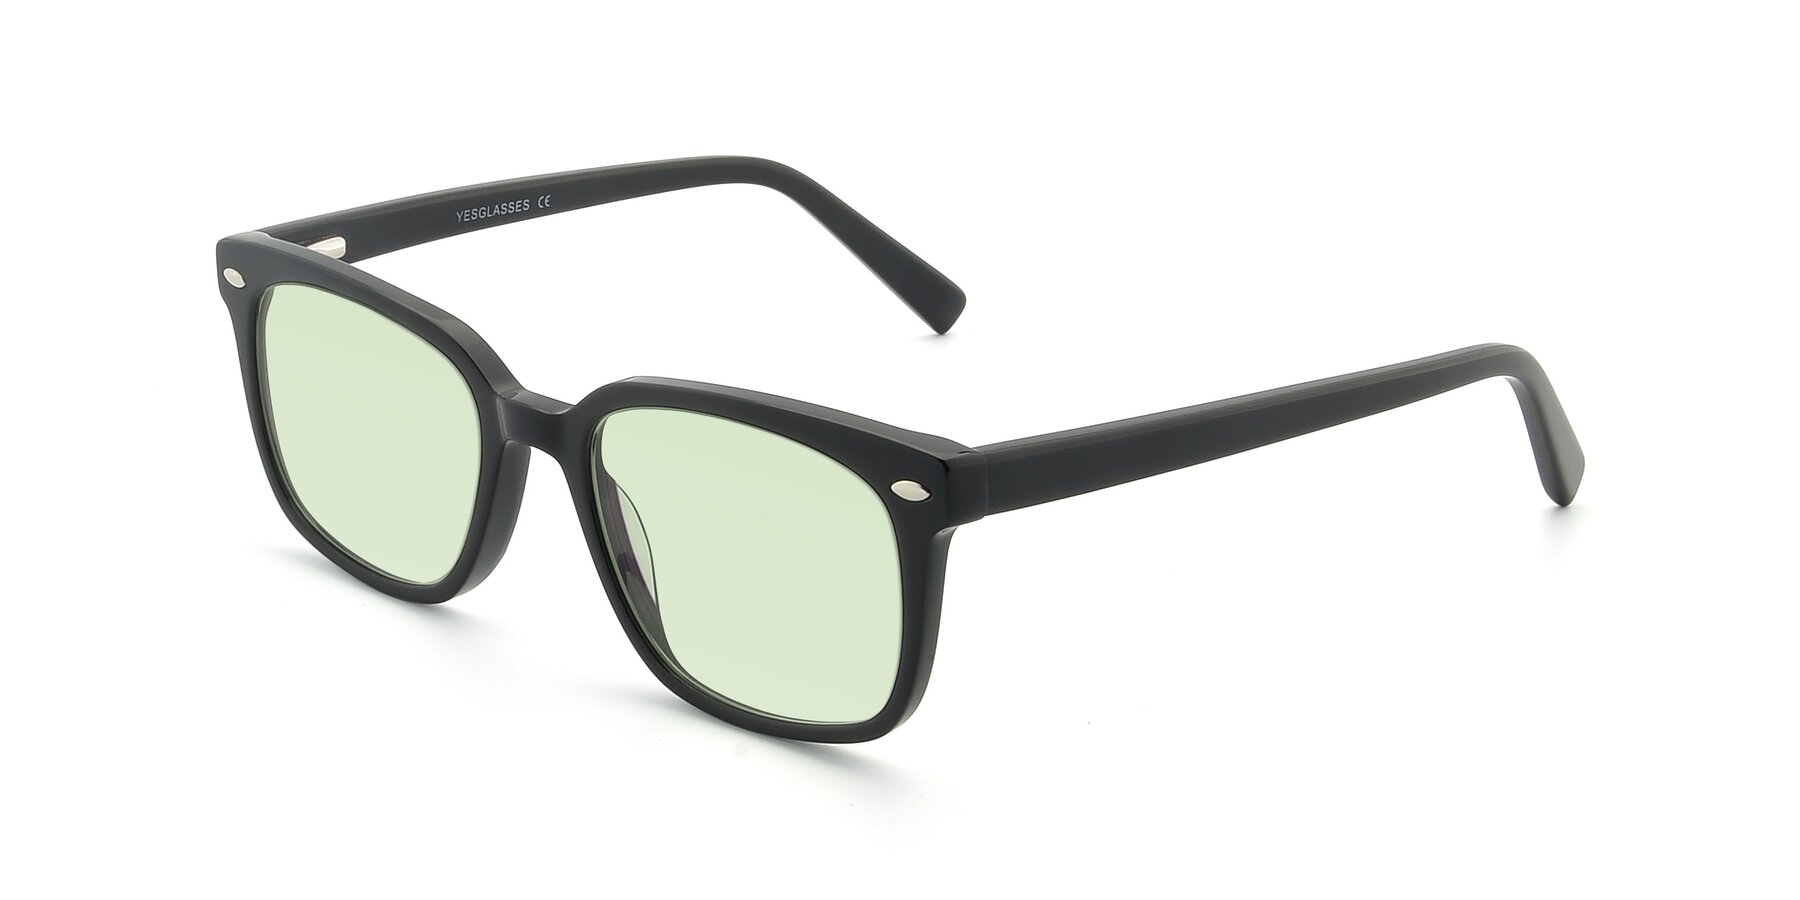 Angle of 17349 in Black with Light Green Tinted Lenses